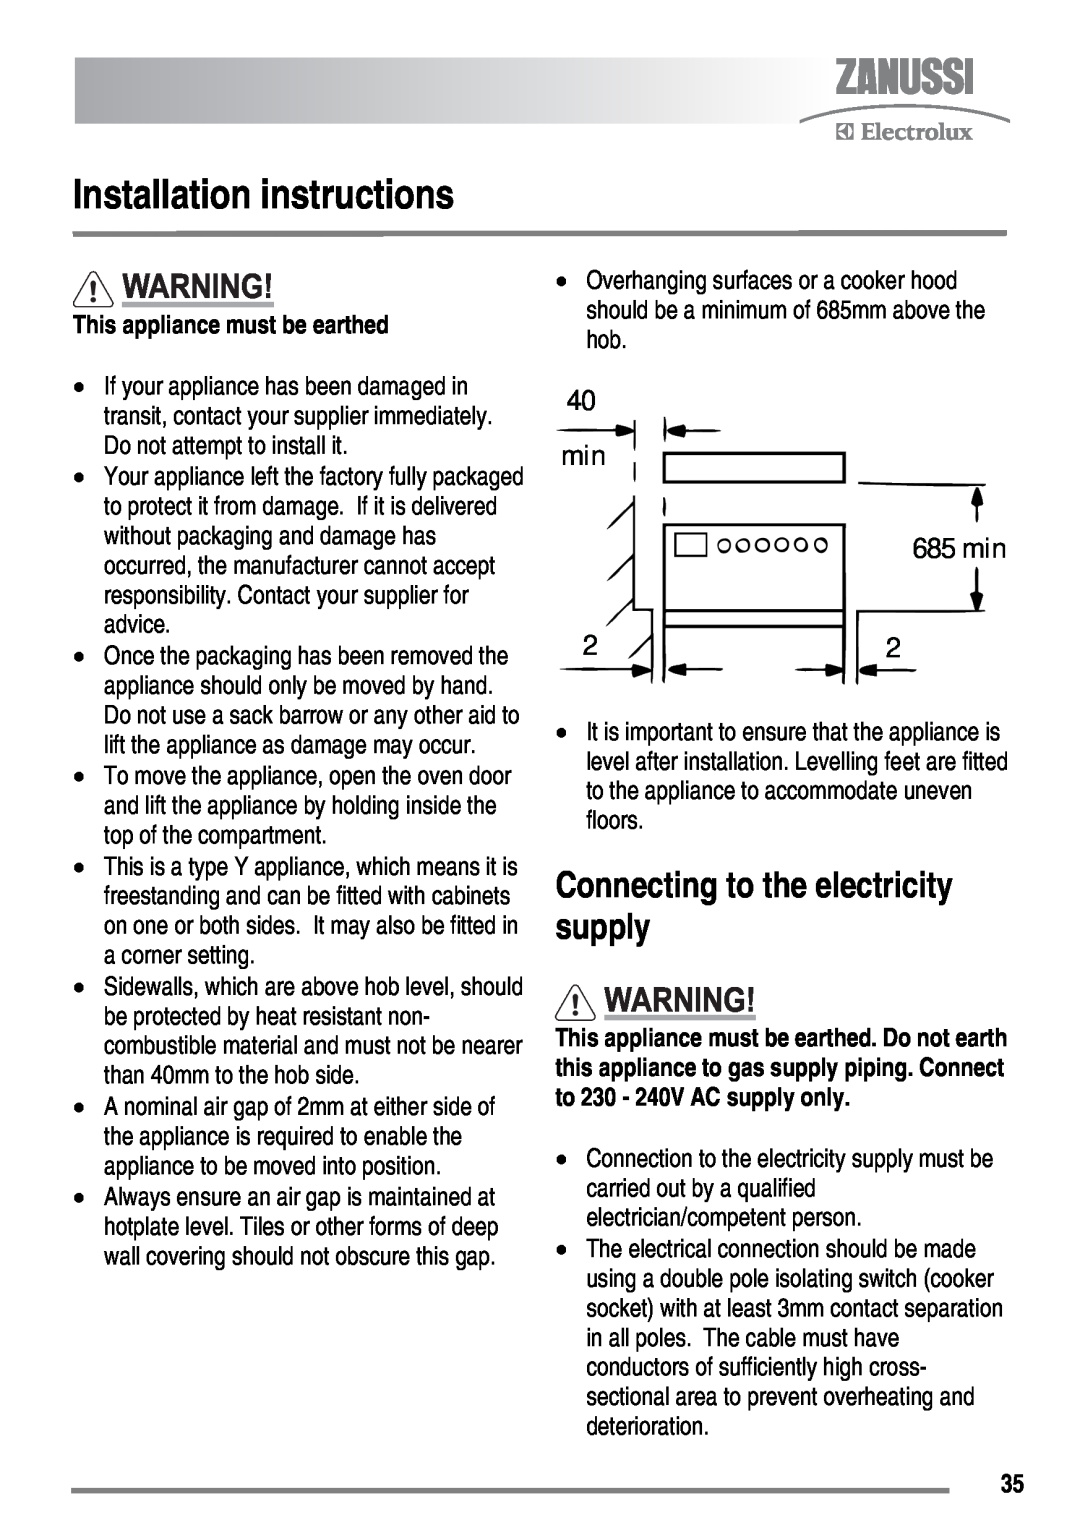 Zanussi ZKT6050 user manual Installation instructions, Connecting to the electricity supply, This appliance must be earthed 